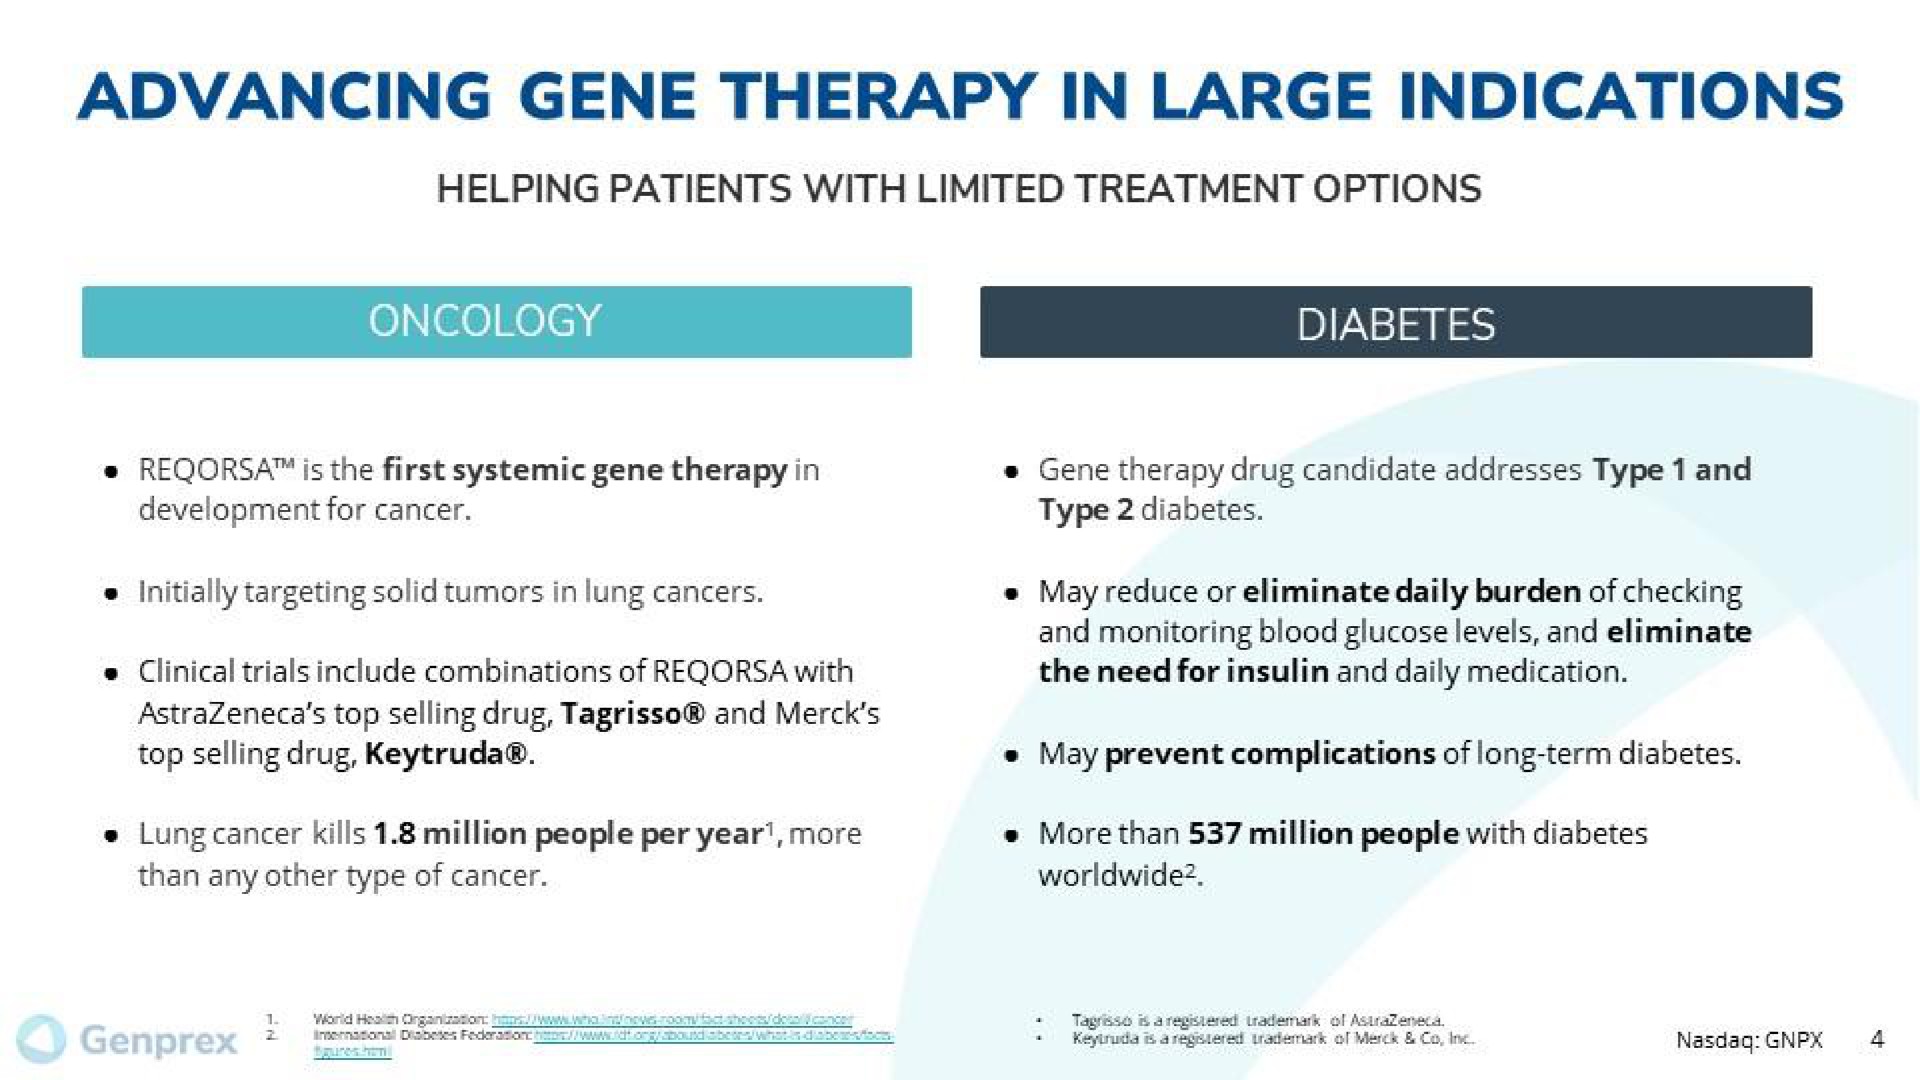 advancing gene therapy in large indications | Genprex